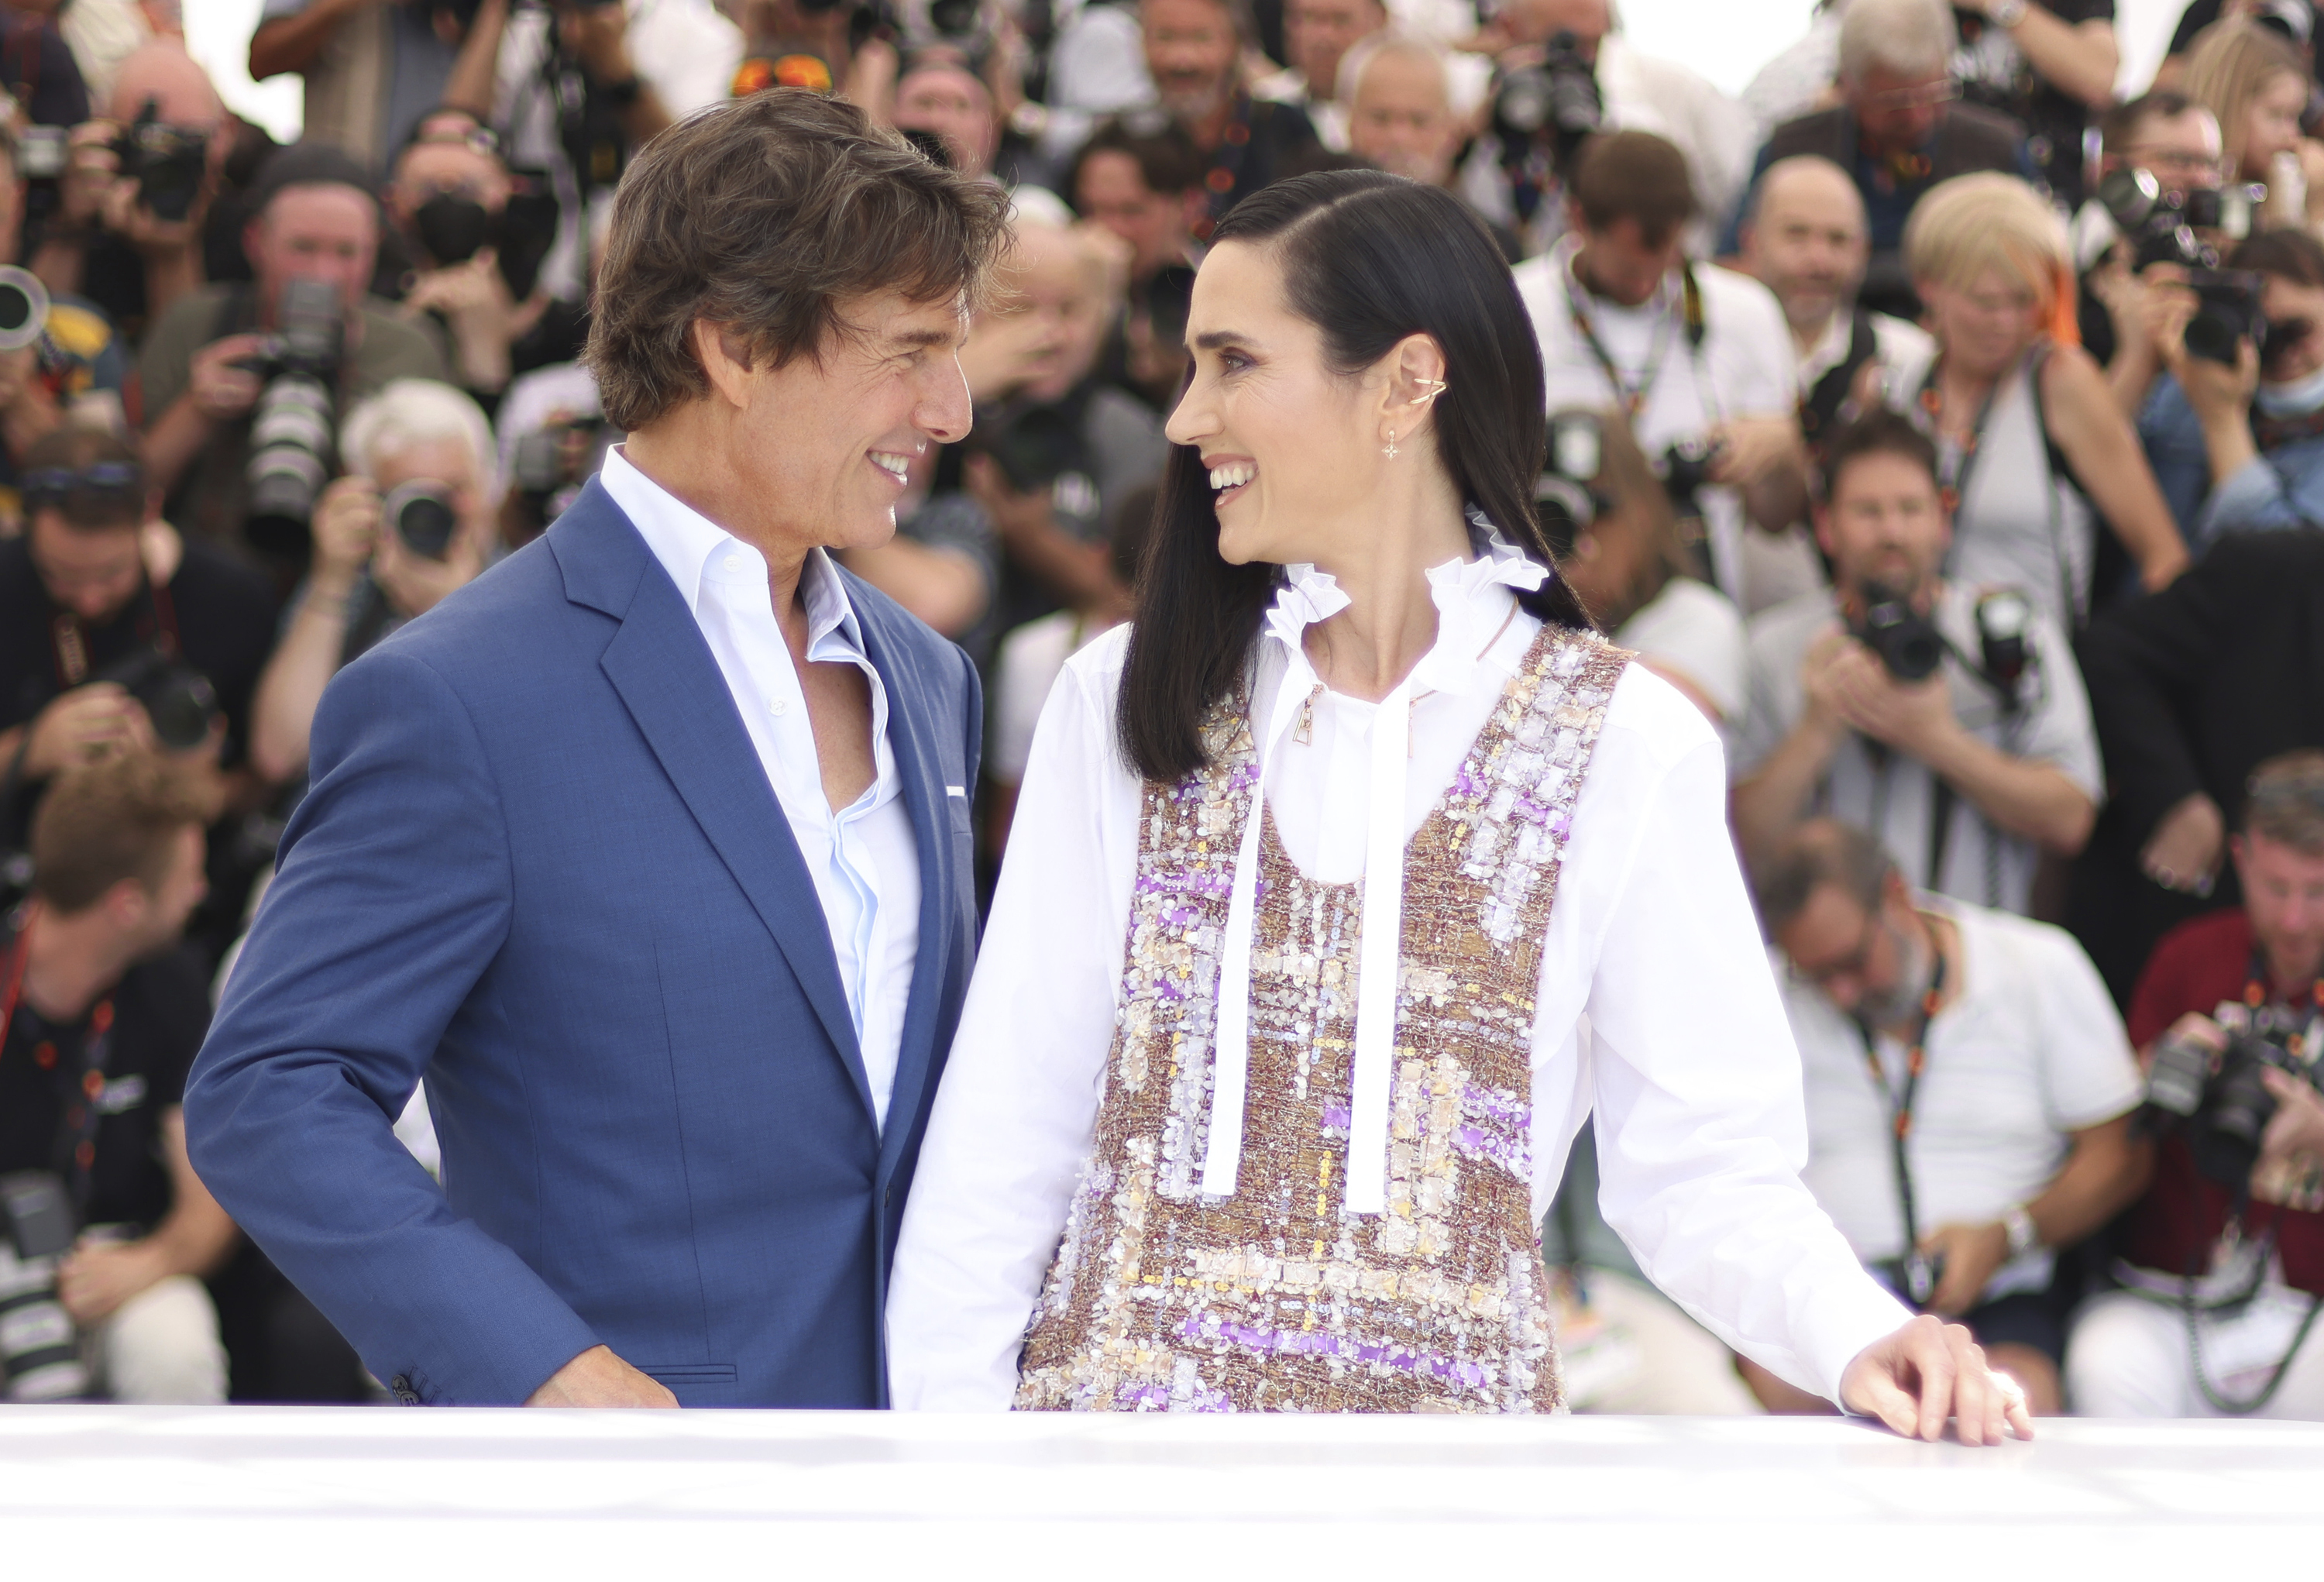 Tom Cruise, left, and Jennifer Connelly pose for photographers at the photo call for the film 'Top Gun: Maverick' at the 75th international film festival, Cannes, southern France, Wednesday, May 18, 2022. (Photo by Vianney Le Caer/Invision/AP)